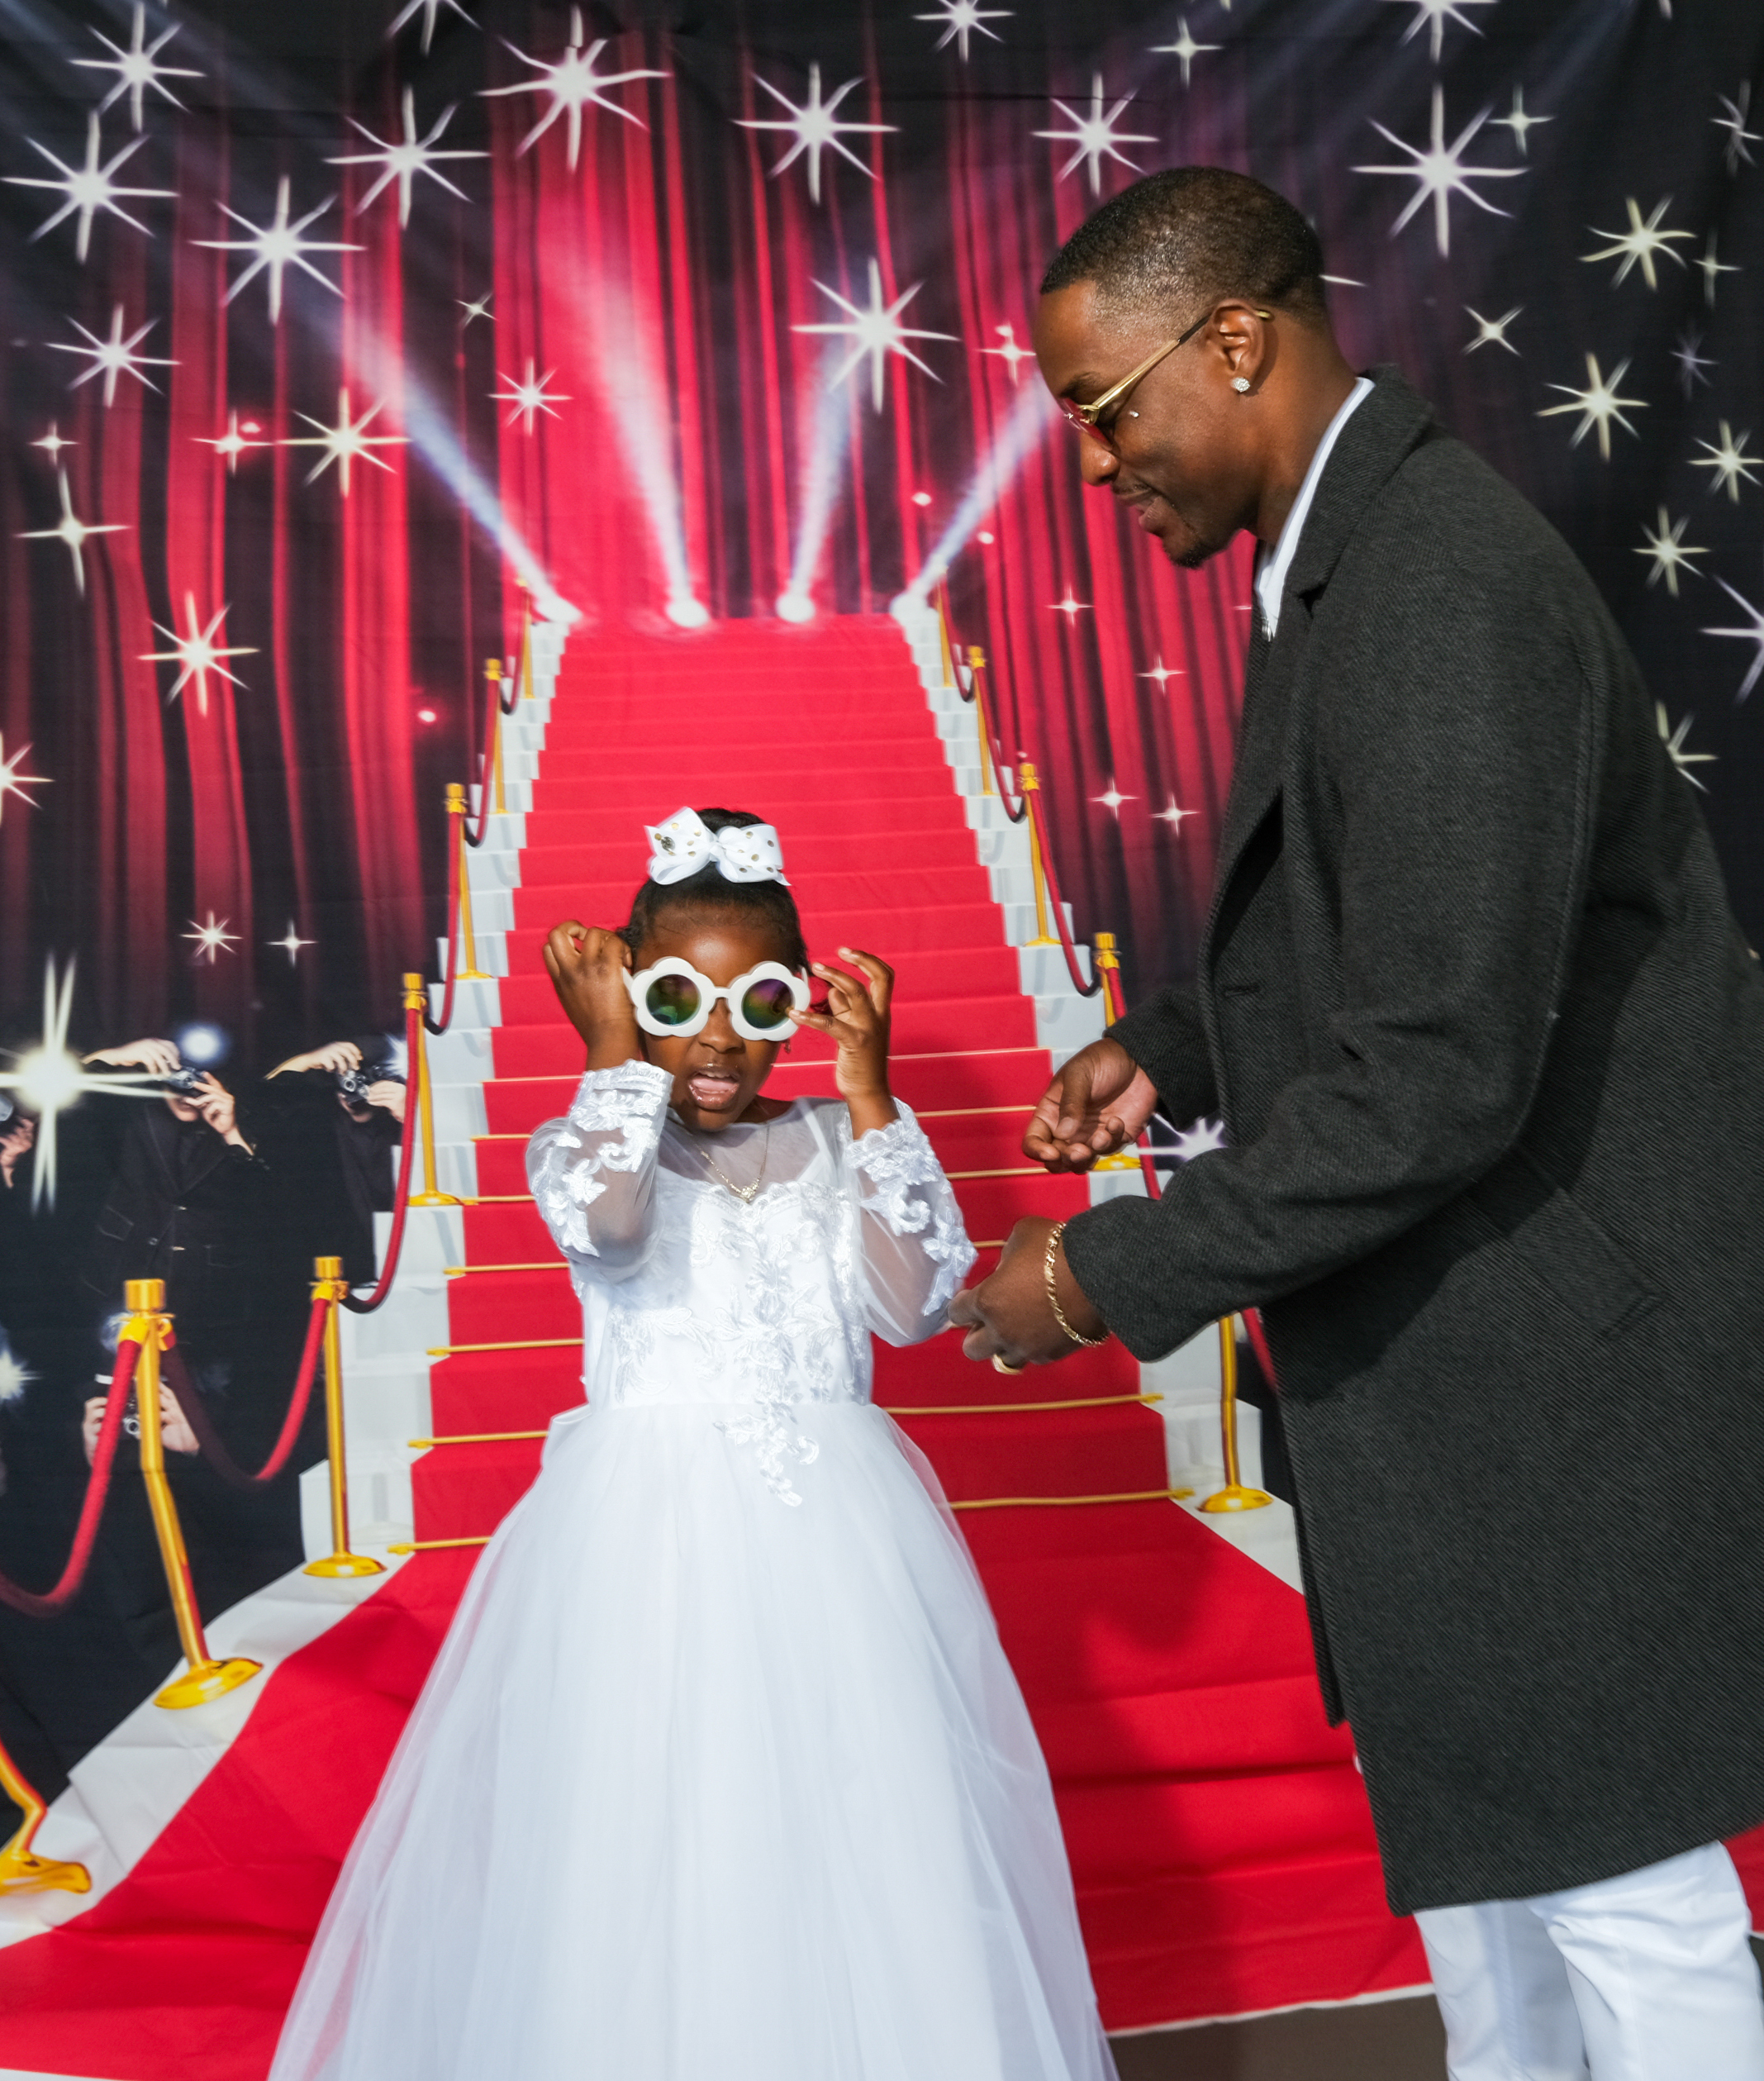 A young girl in a white dress adjusts big sunglasses, with a man beside her against a backdrop of a red carpet stairway and sparkling stars.